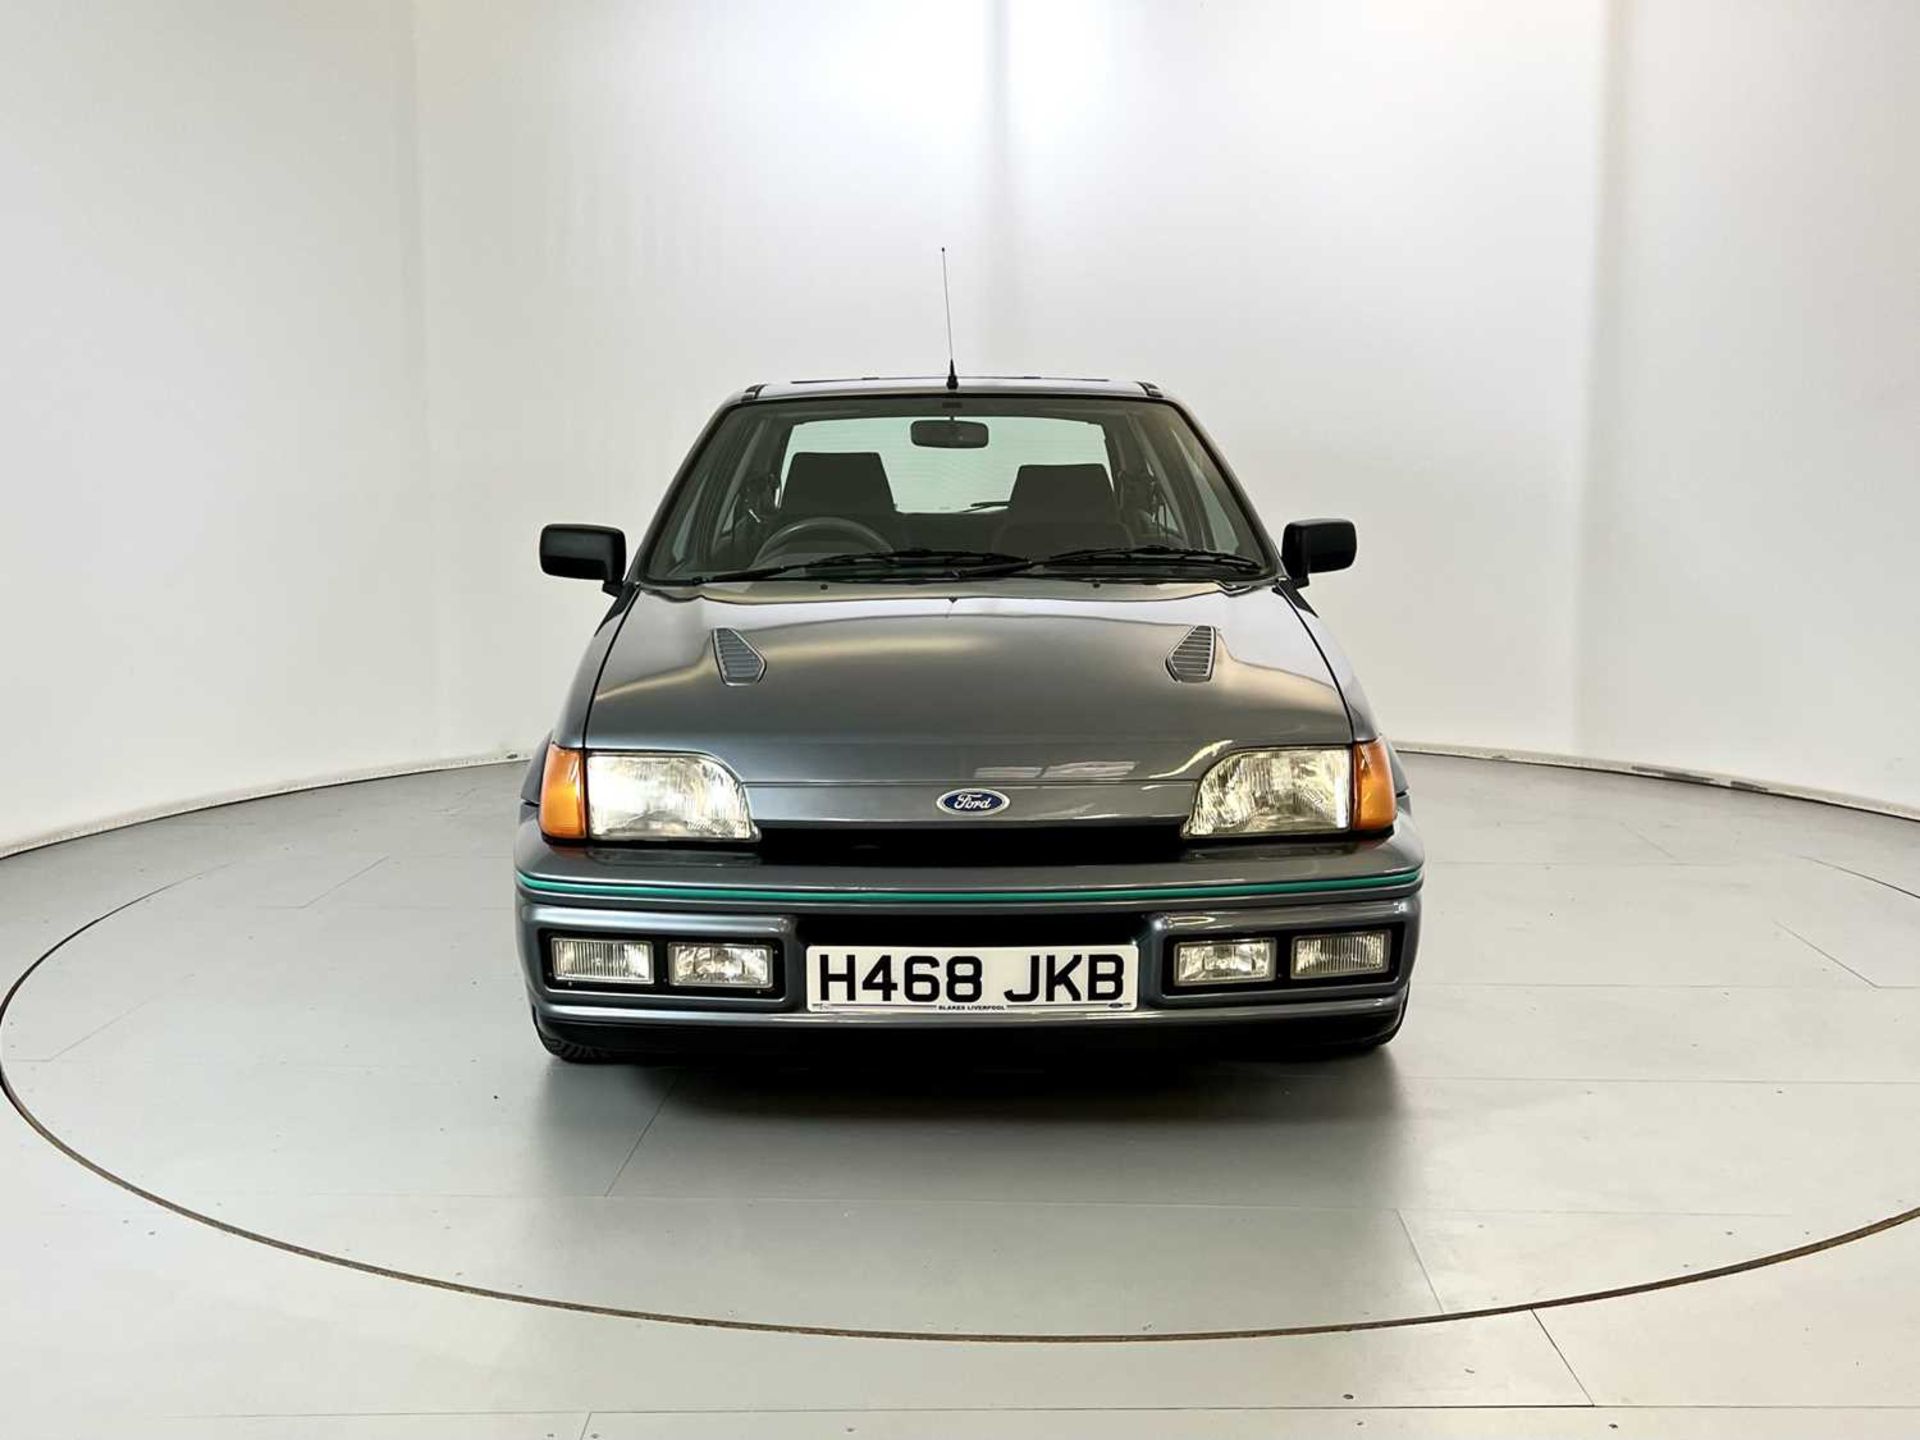 1991 Ford Fiesta RS Turbo - Image 2 of 32